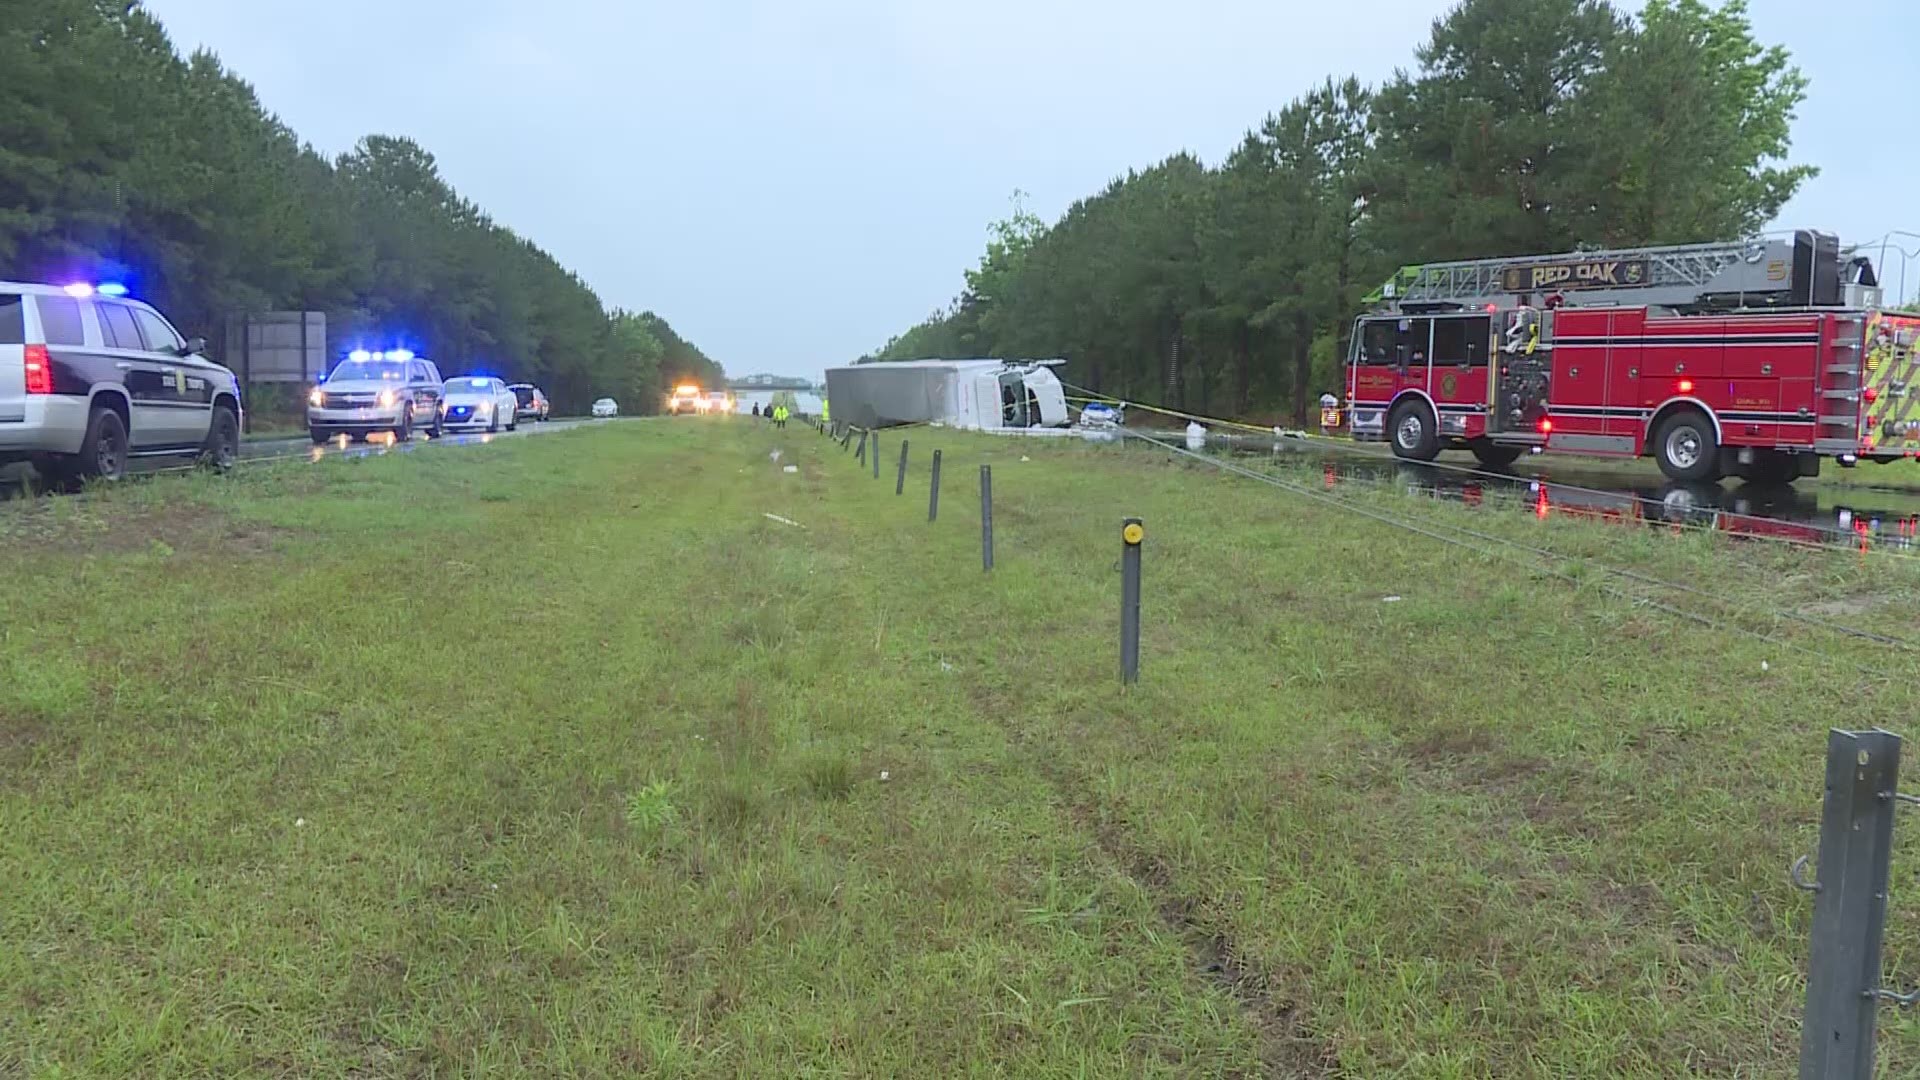 Four teenagers were killed in a head-on crash with a box truck that lost control in the rain on U.S. 264 in Pitt County, North Carolina.